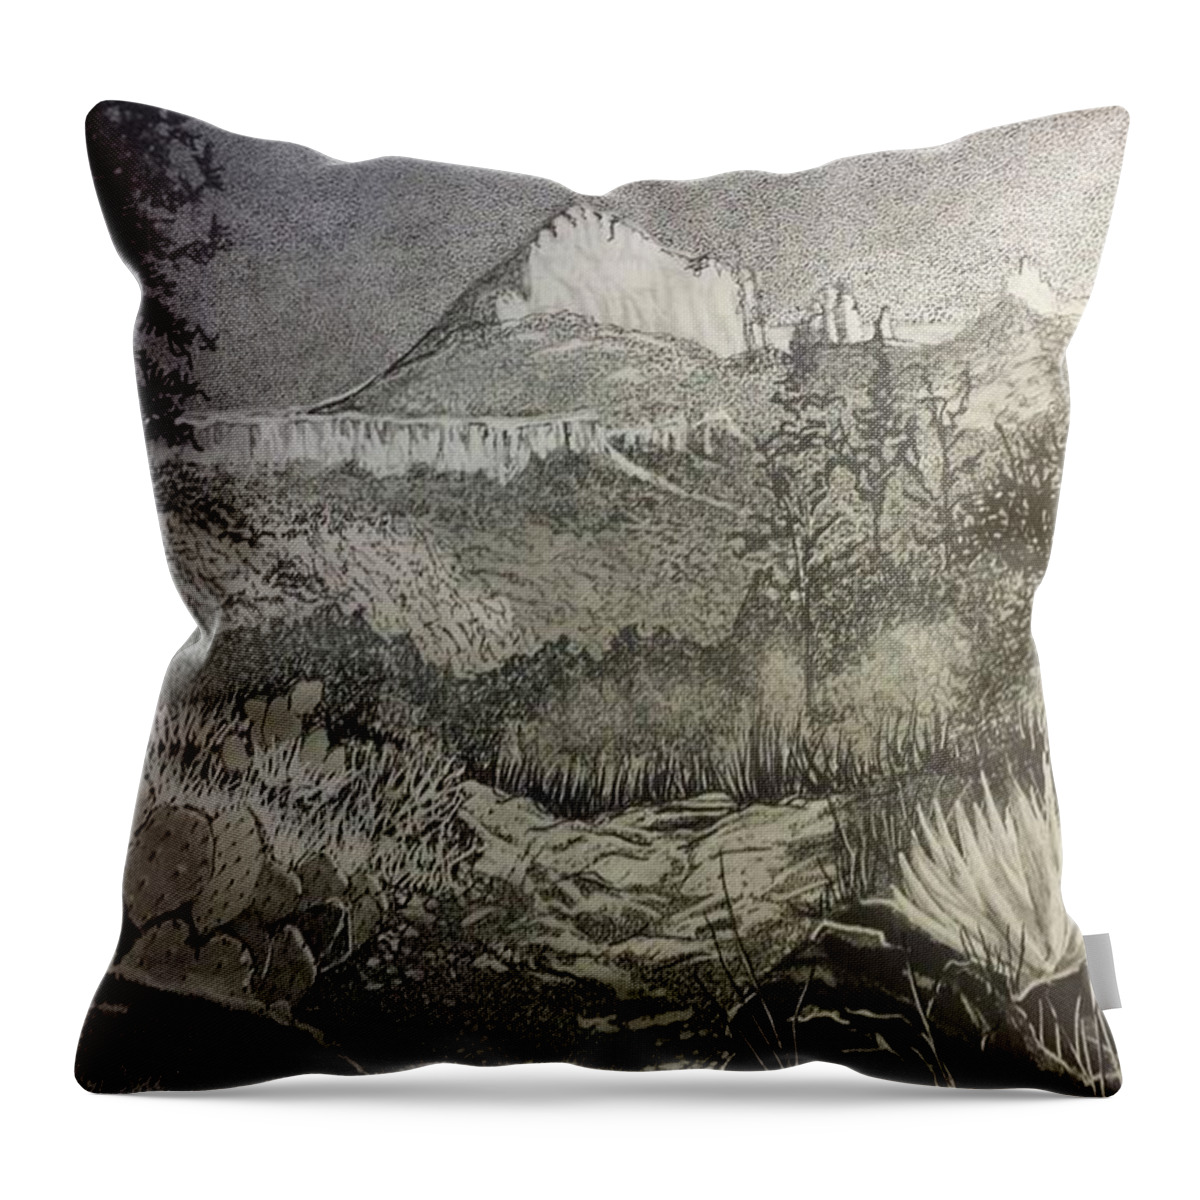 Pen And Ink Throw Pillow featuring the drawing Desert Beauty by Betsy Carlson Cross